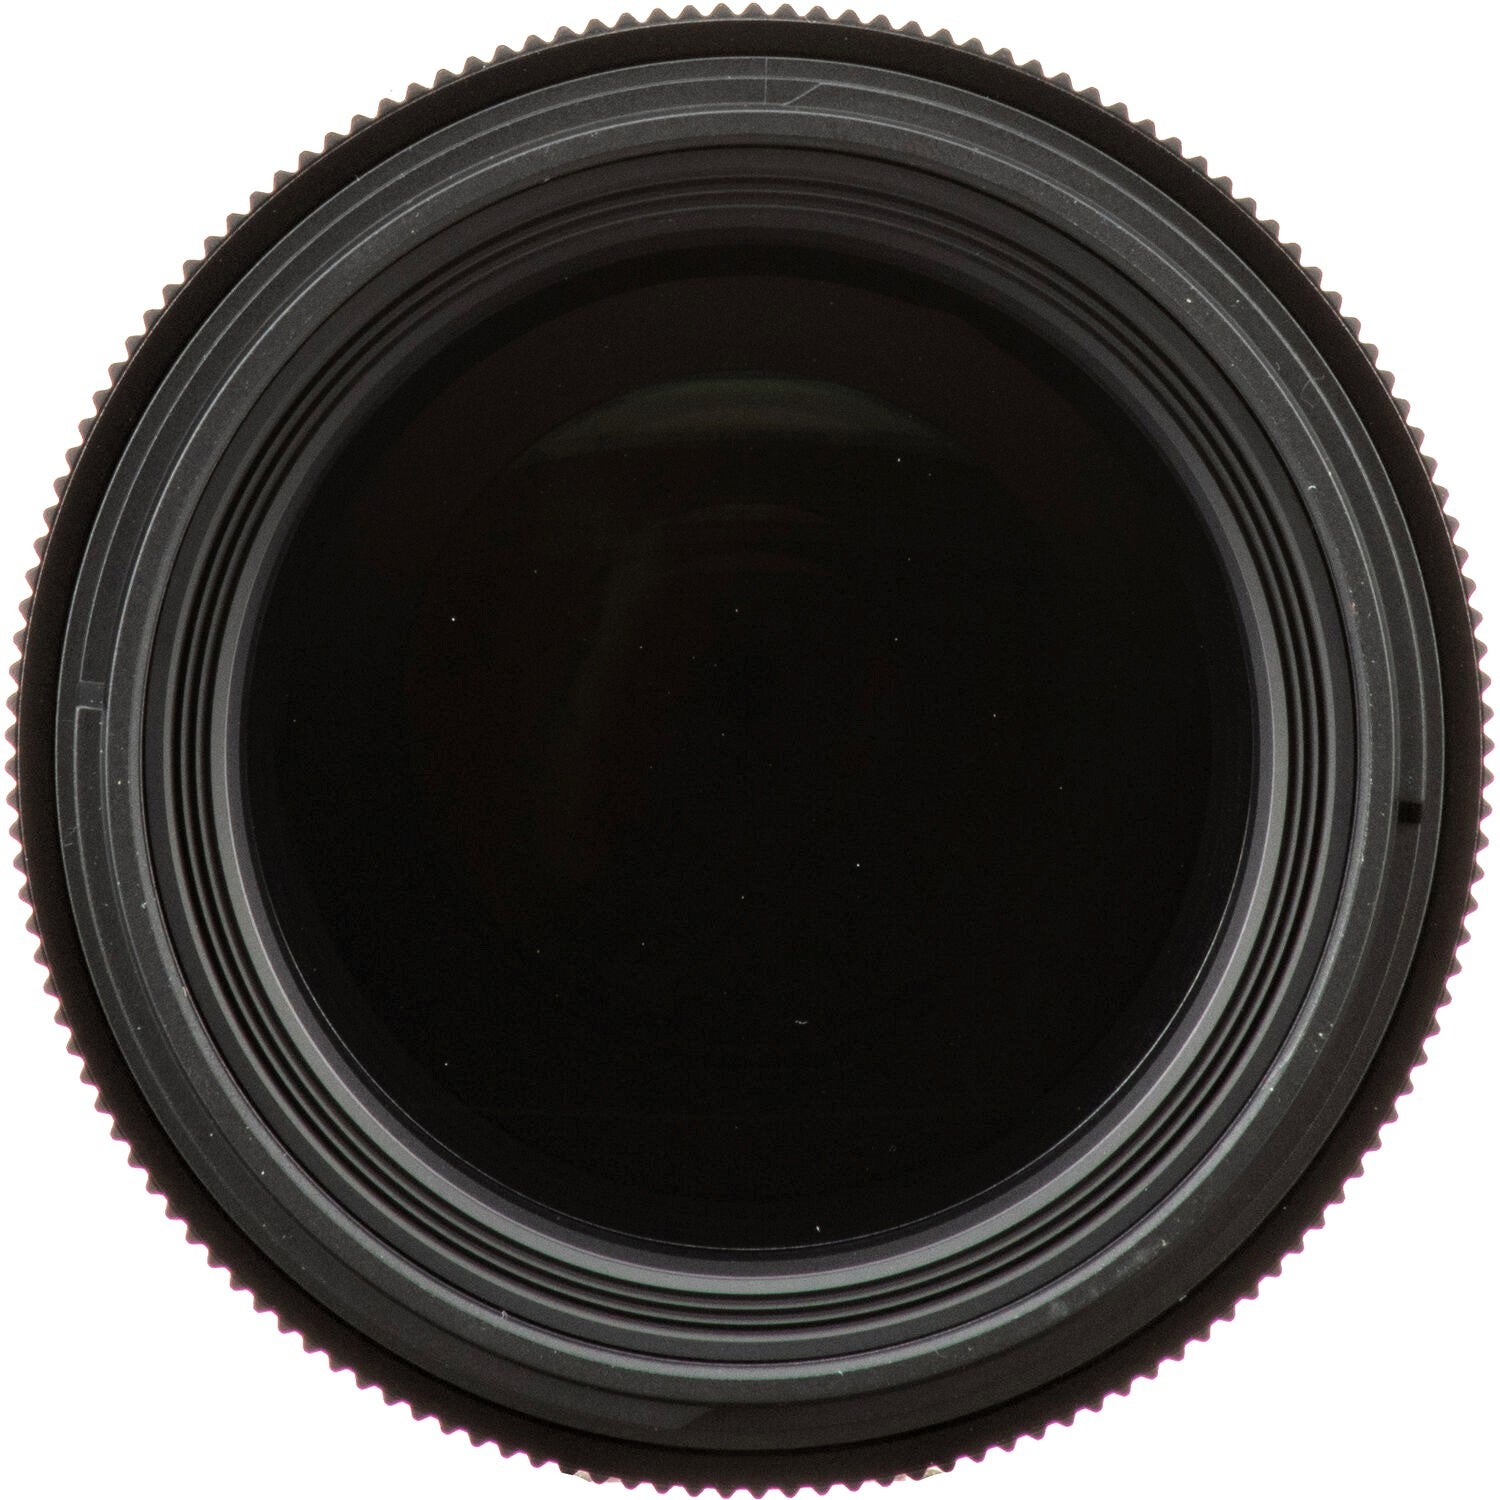 Sigma 105mm F2.8 DG DN Macro Art Lens for Sony E in a Front-Side View